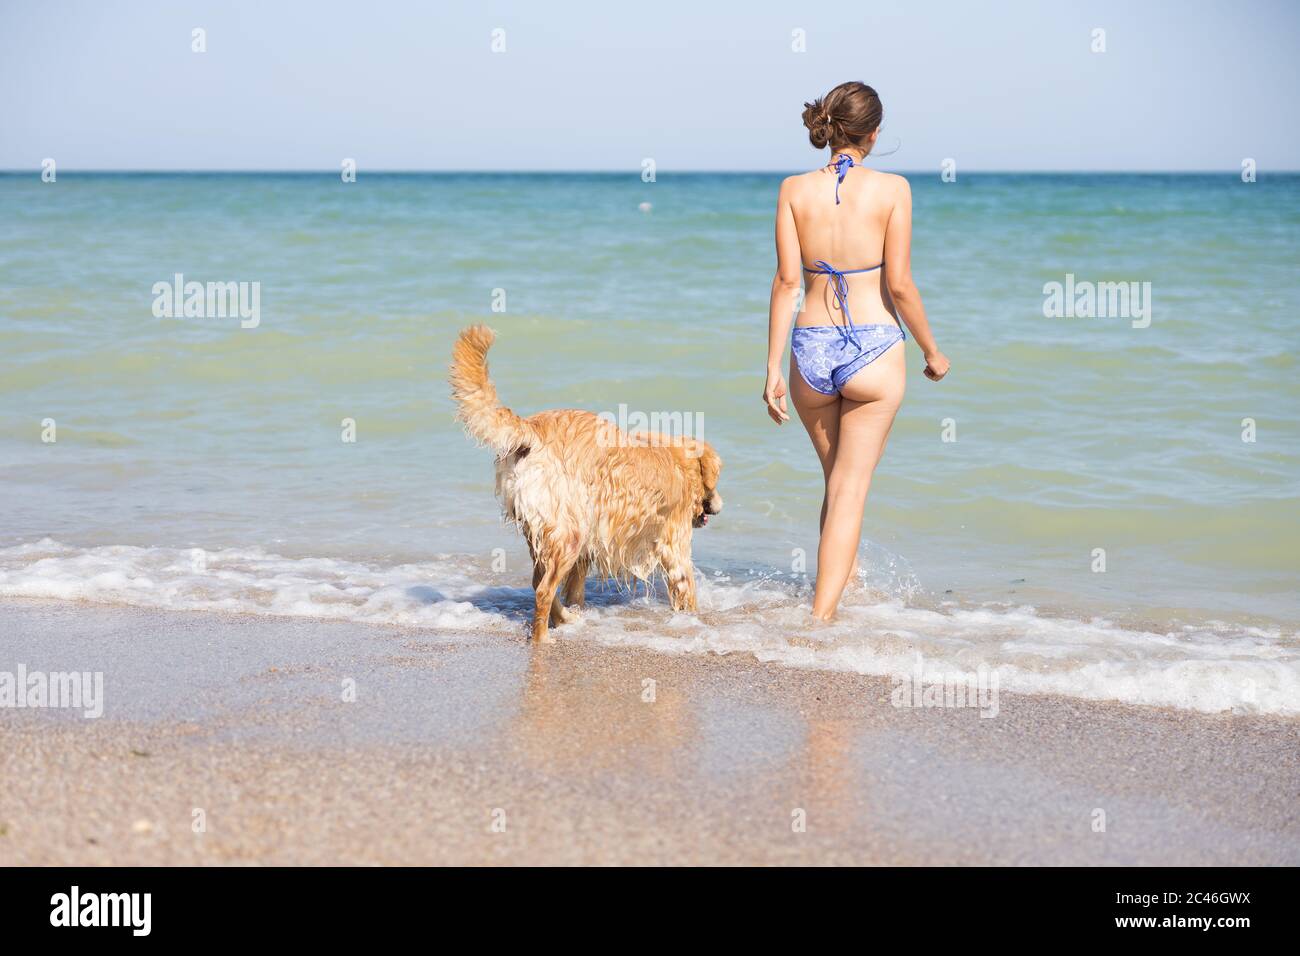 The young woman in swimsuit and her dog enter the sea Stock Photo